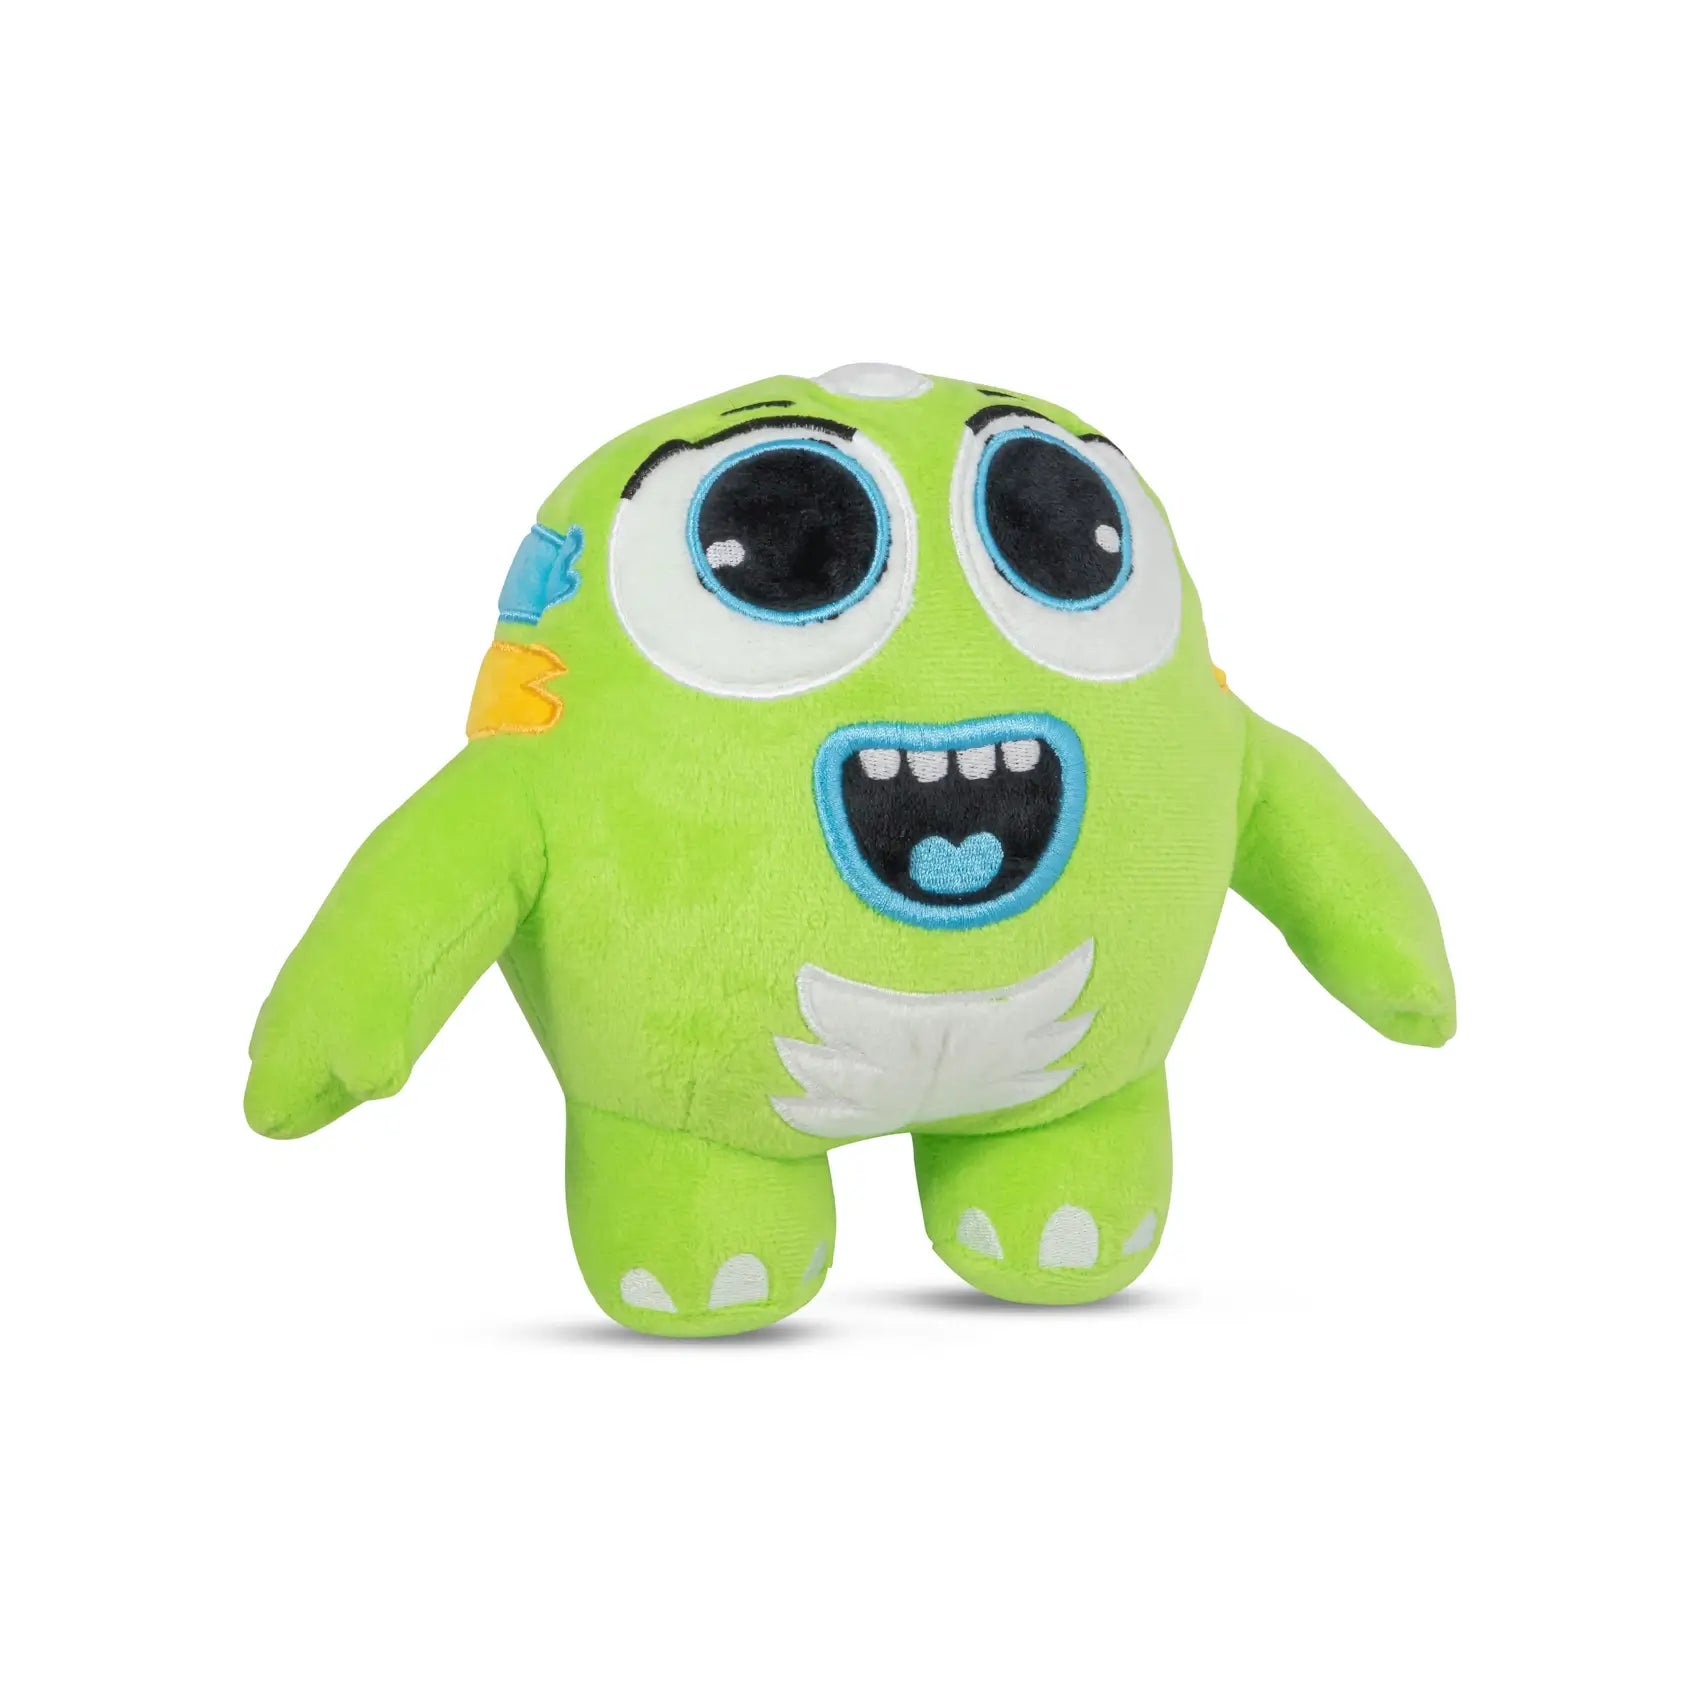 oloe-character-plush-toy-lozi-green-front-facing